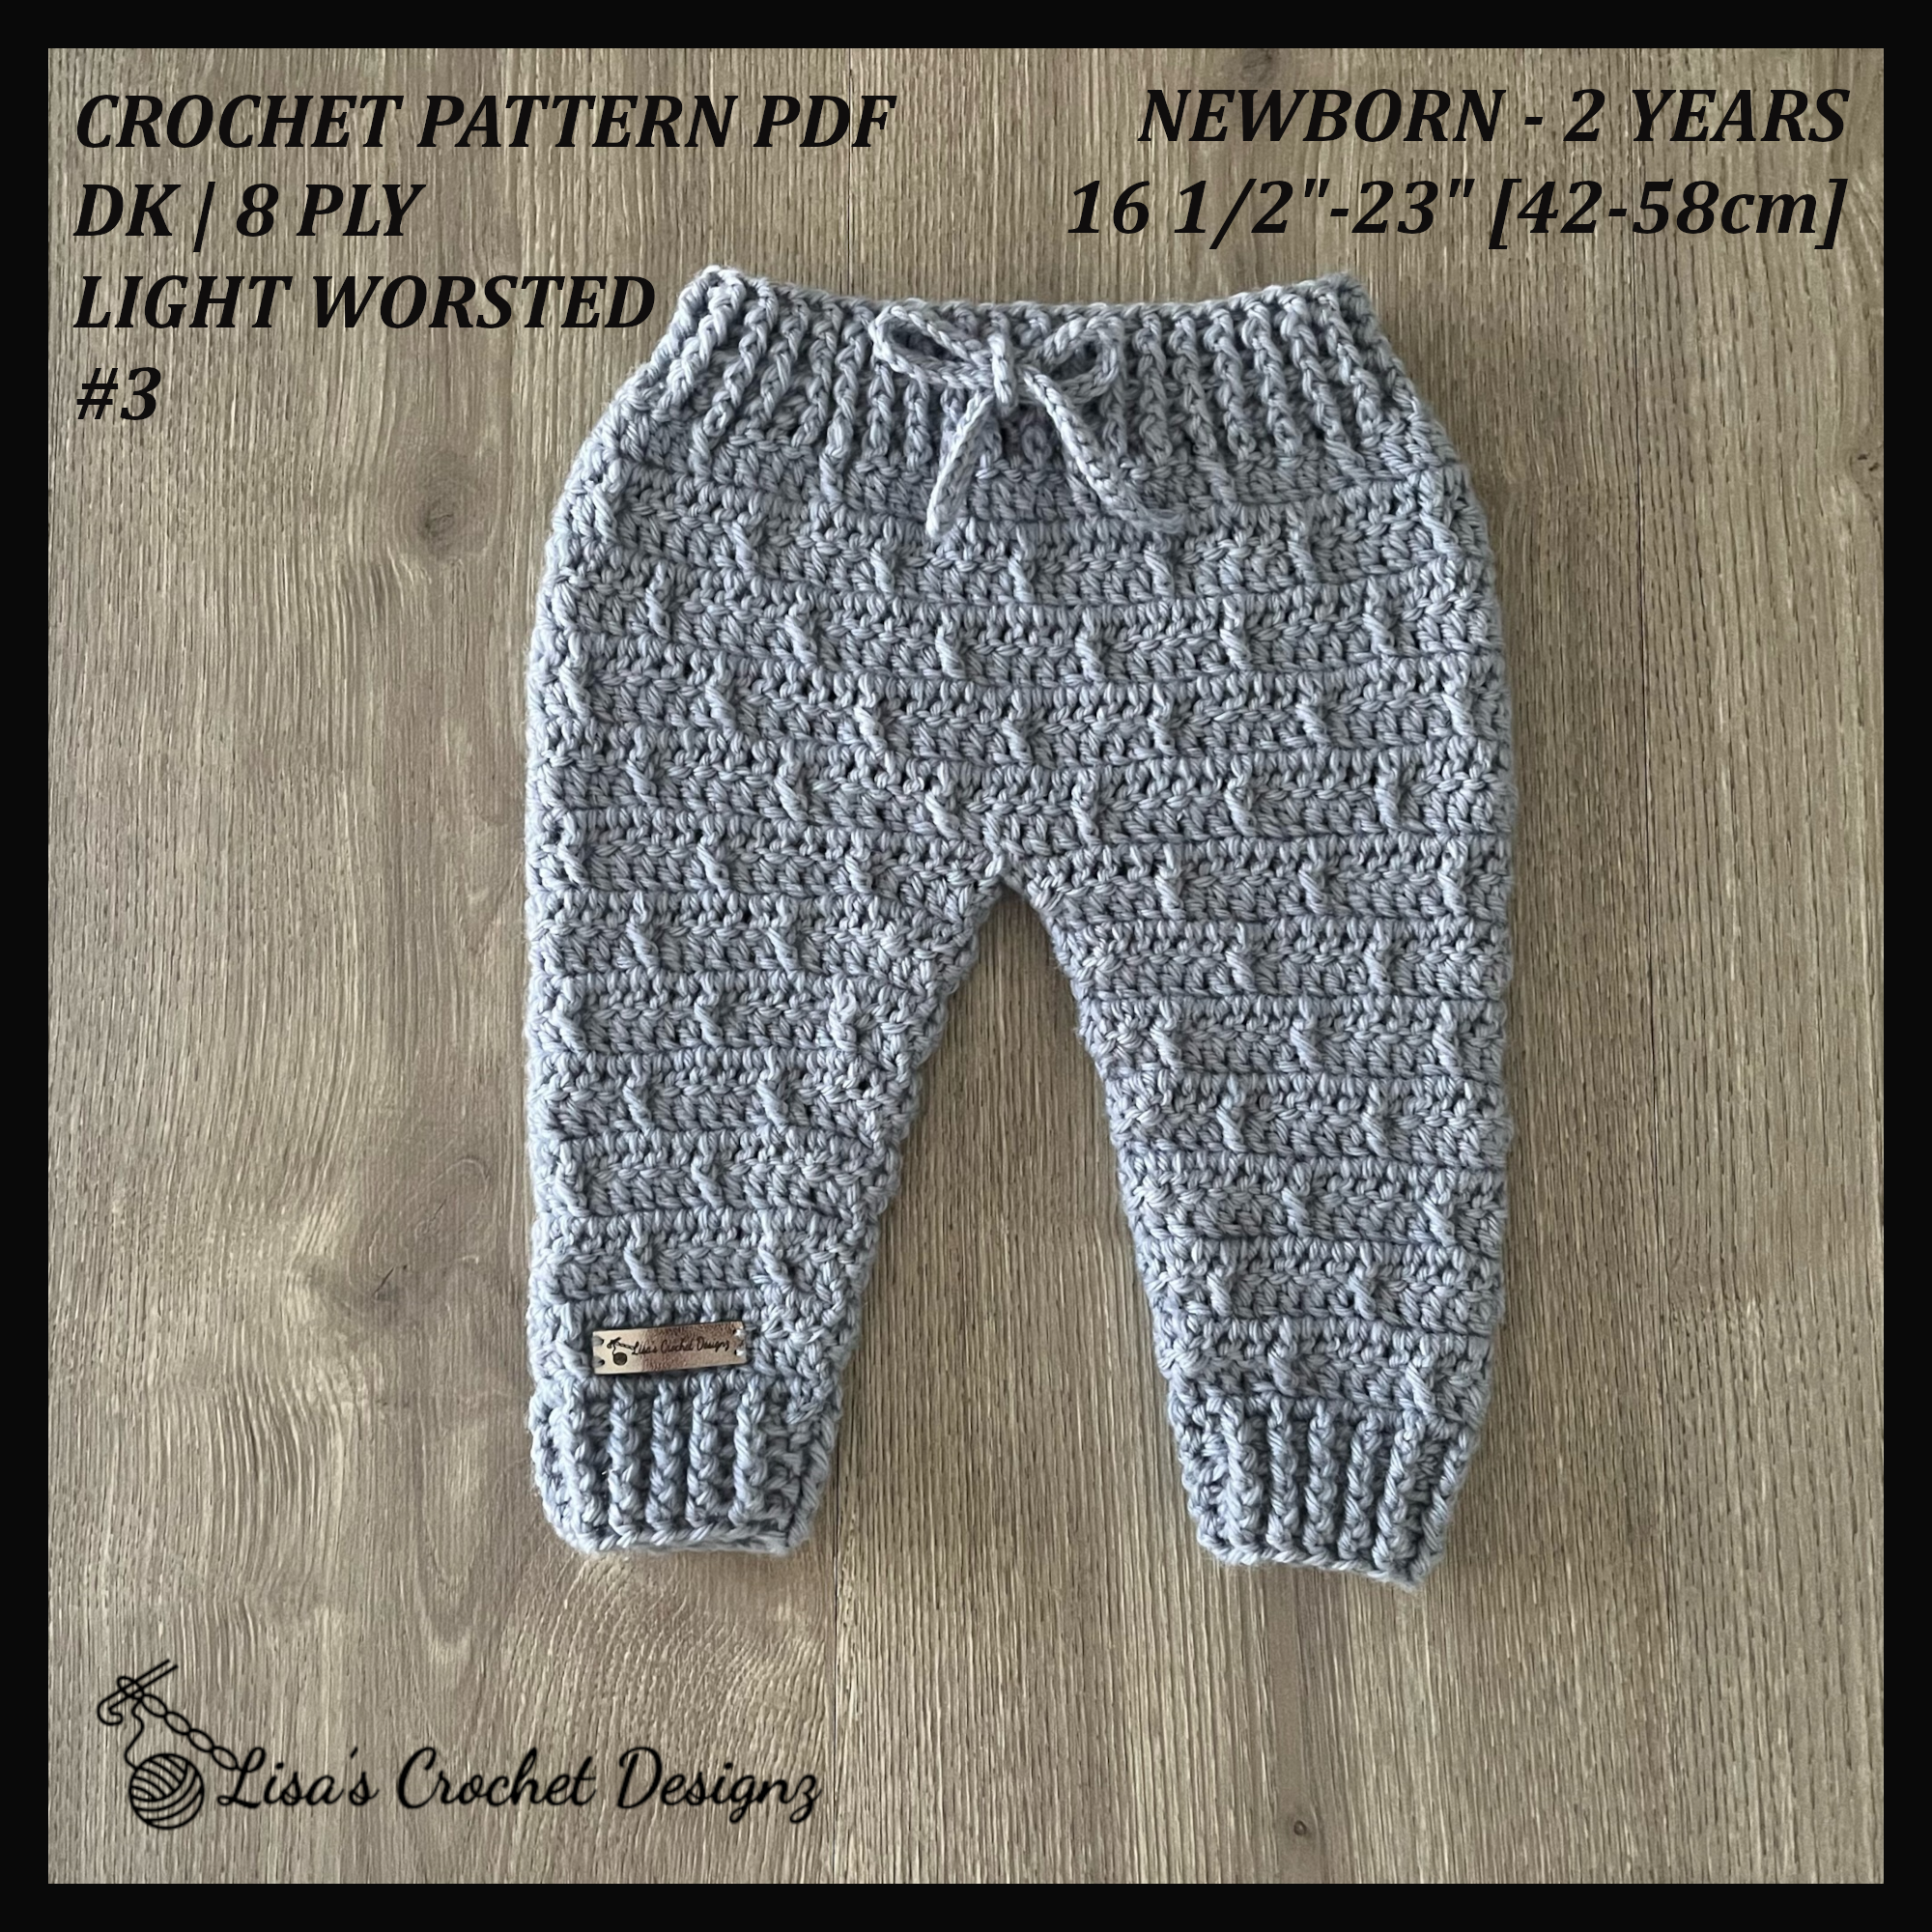 Sewing instructions for simple children's pants (+ universal pants pattern)  - Picolly.com